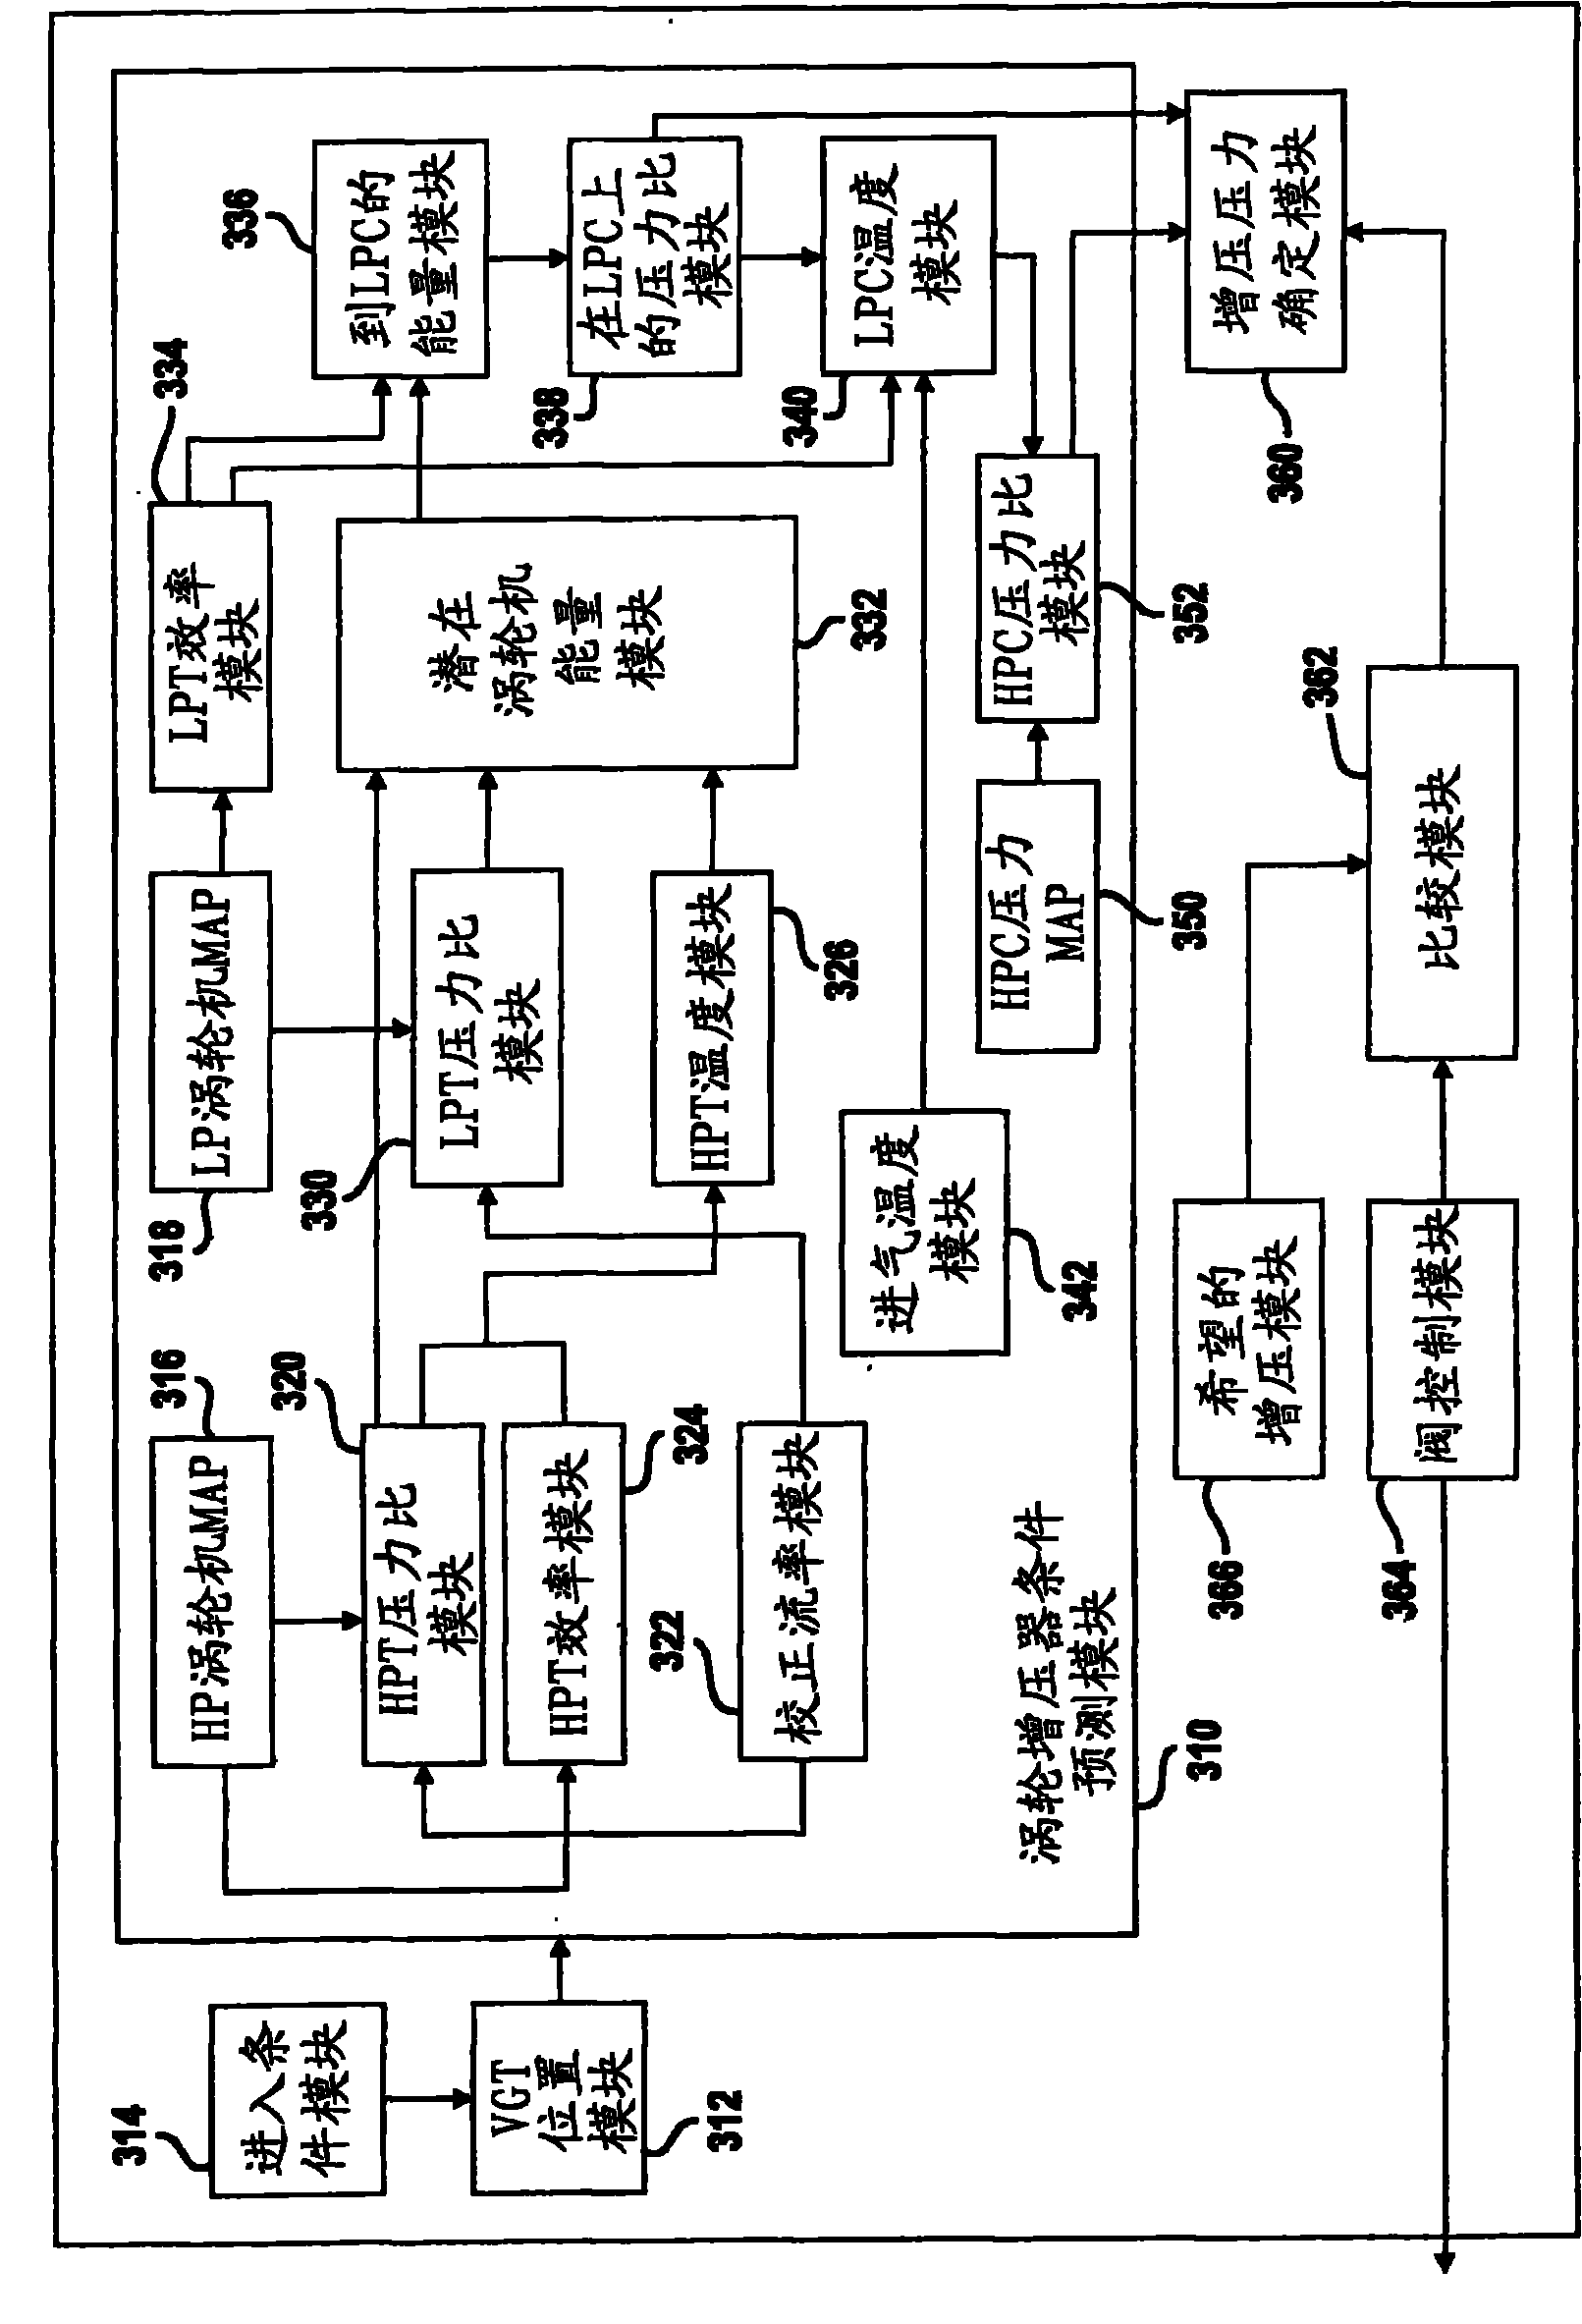 System and method for mode transition for a two-stage series sequential turbocharger